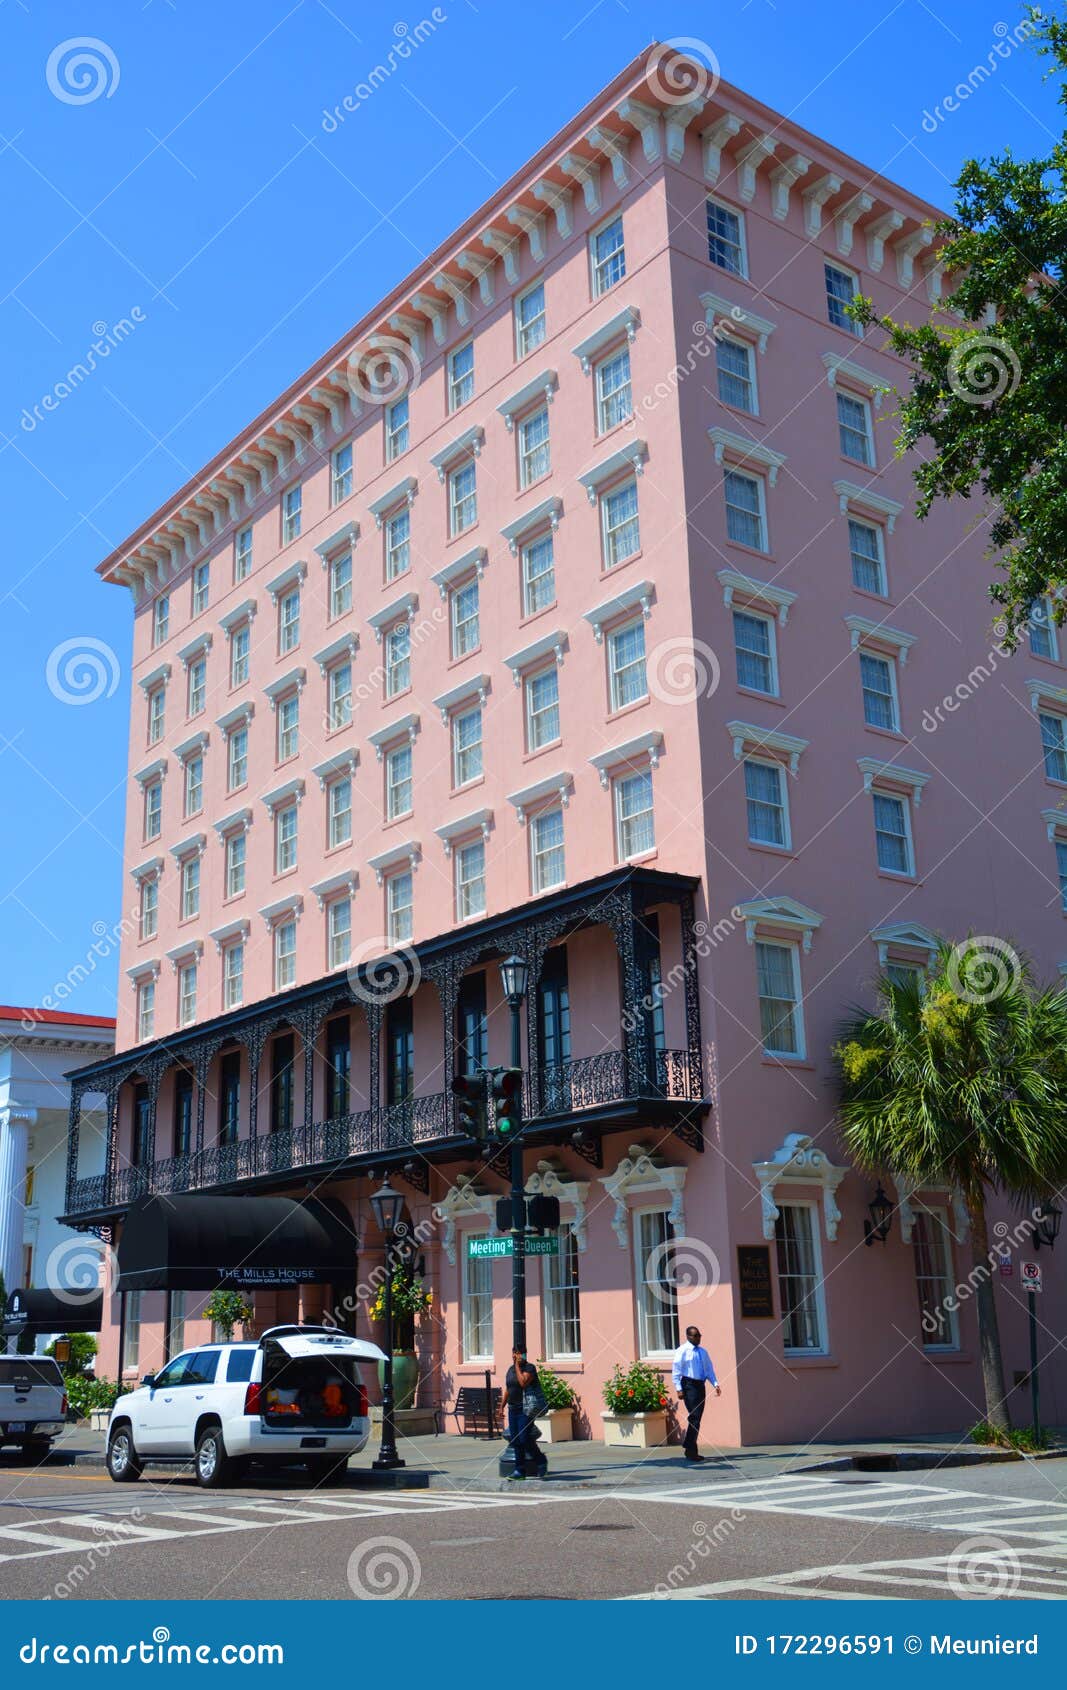 The Mills House Wyndham Grand Hotel Editorial Photo Image Of Historic June 172296591